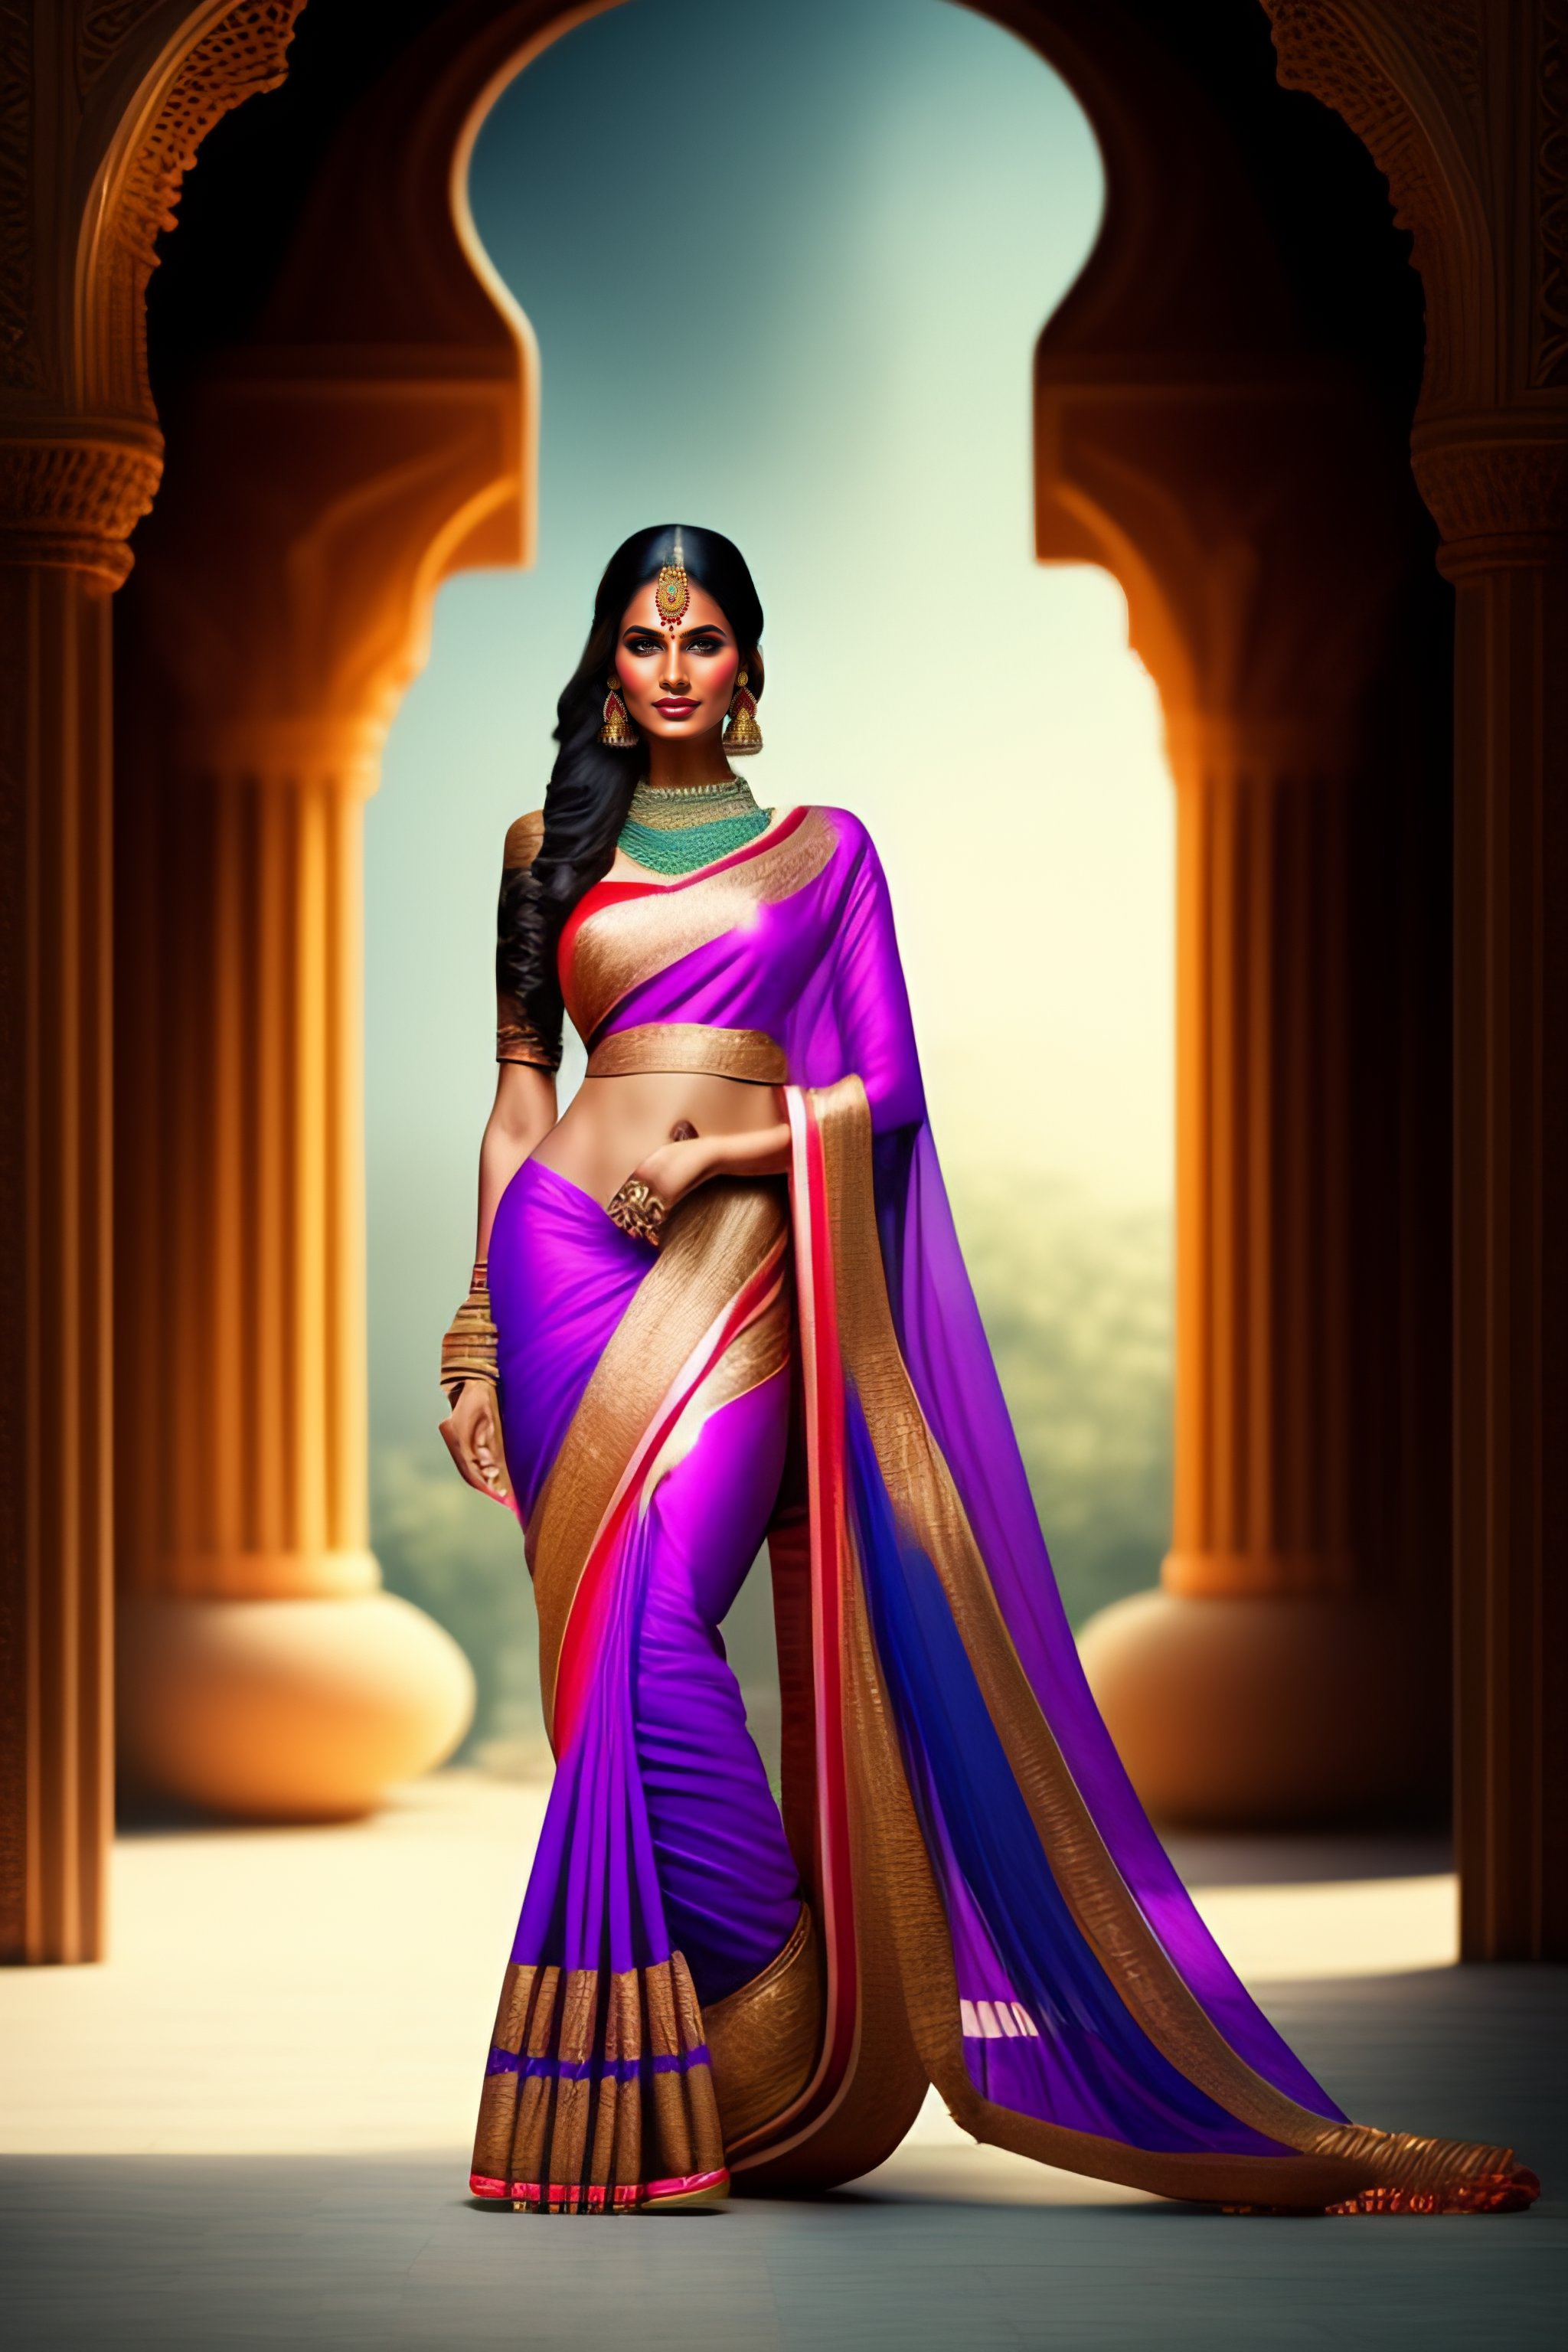 Beautiful Long Haired Indian Woman In Purple Lingerie Stock Photo, Picture  and Royalty Free Image. Image 4190688.